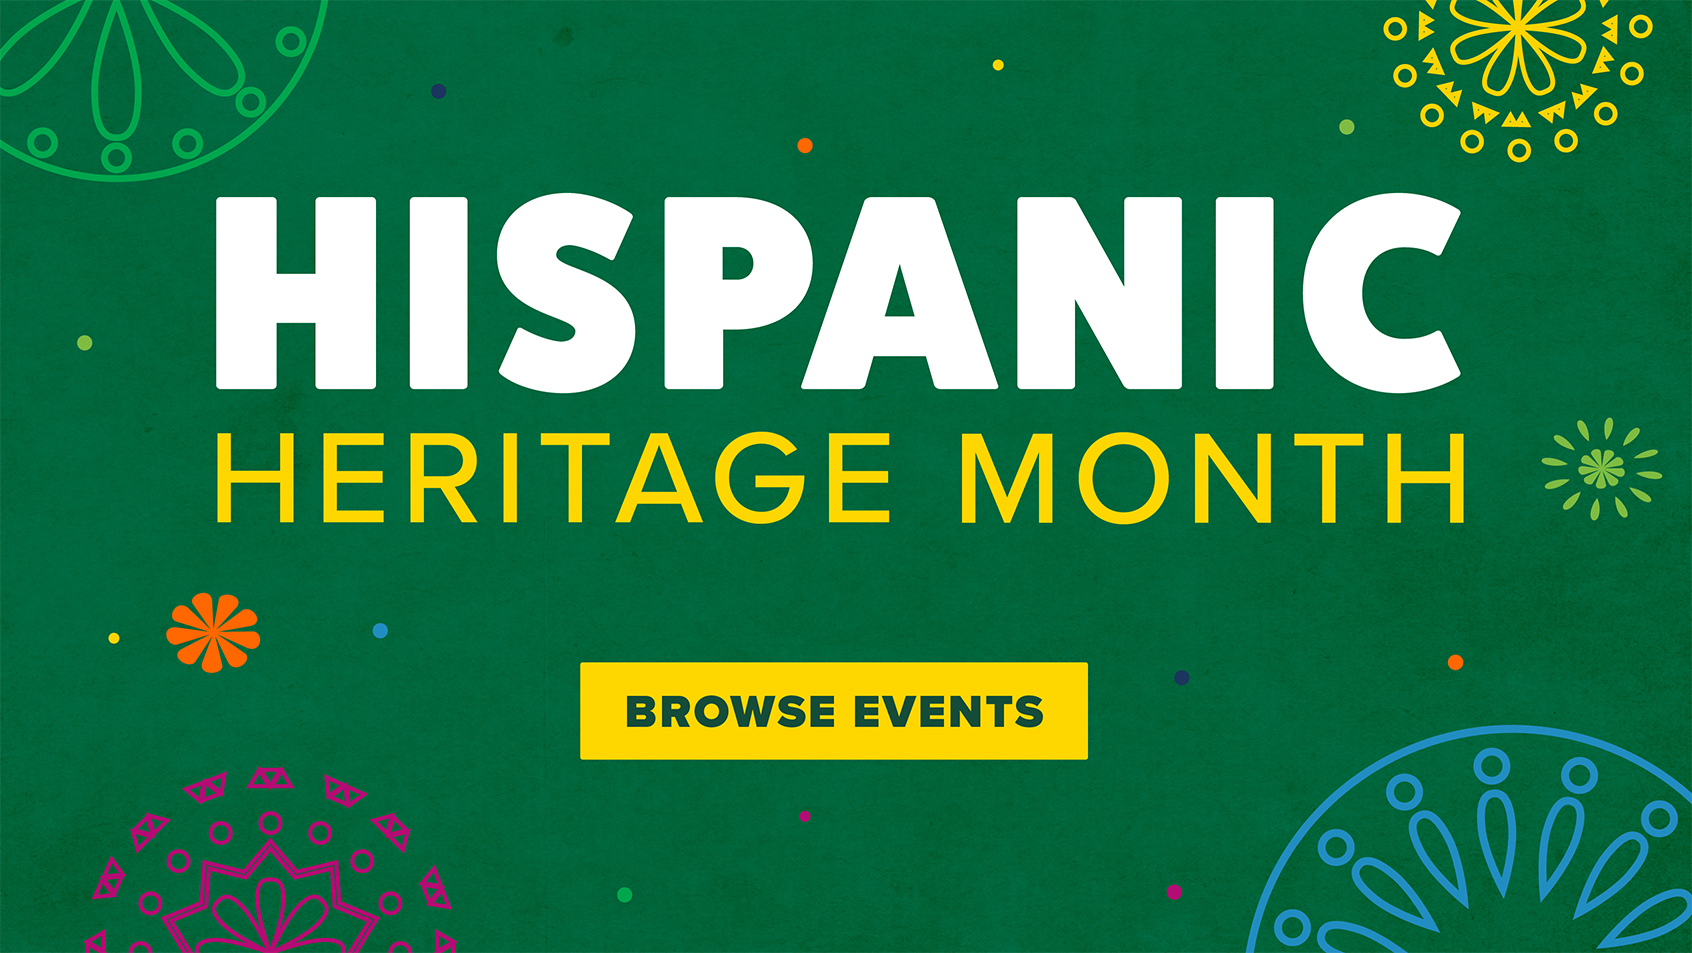 Hispanic Heritage Month: Browse events